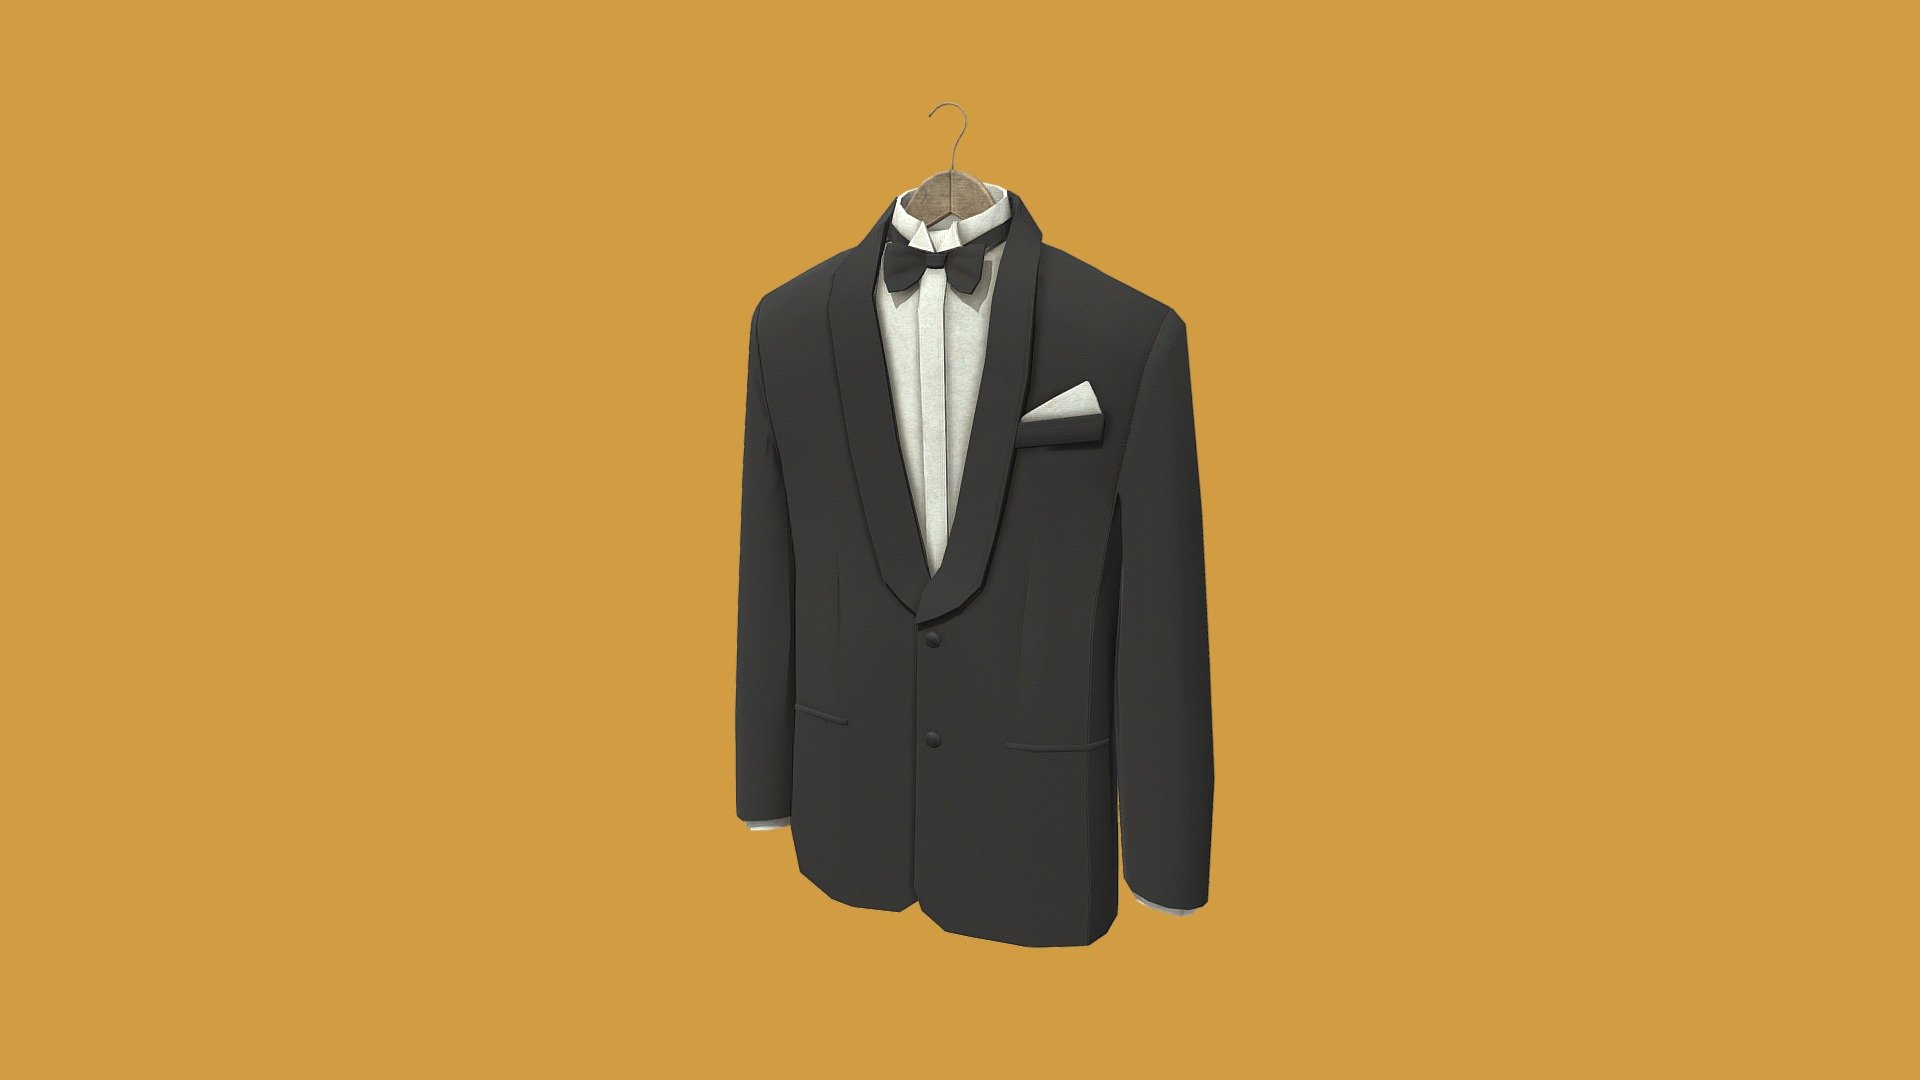 Dusty old Tuxedo. low poly

Part of a larger scene: https://skfb.ly/6yJPI

Modeled in Blender textured in Substance 3d model